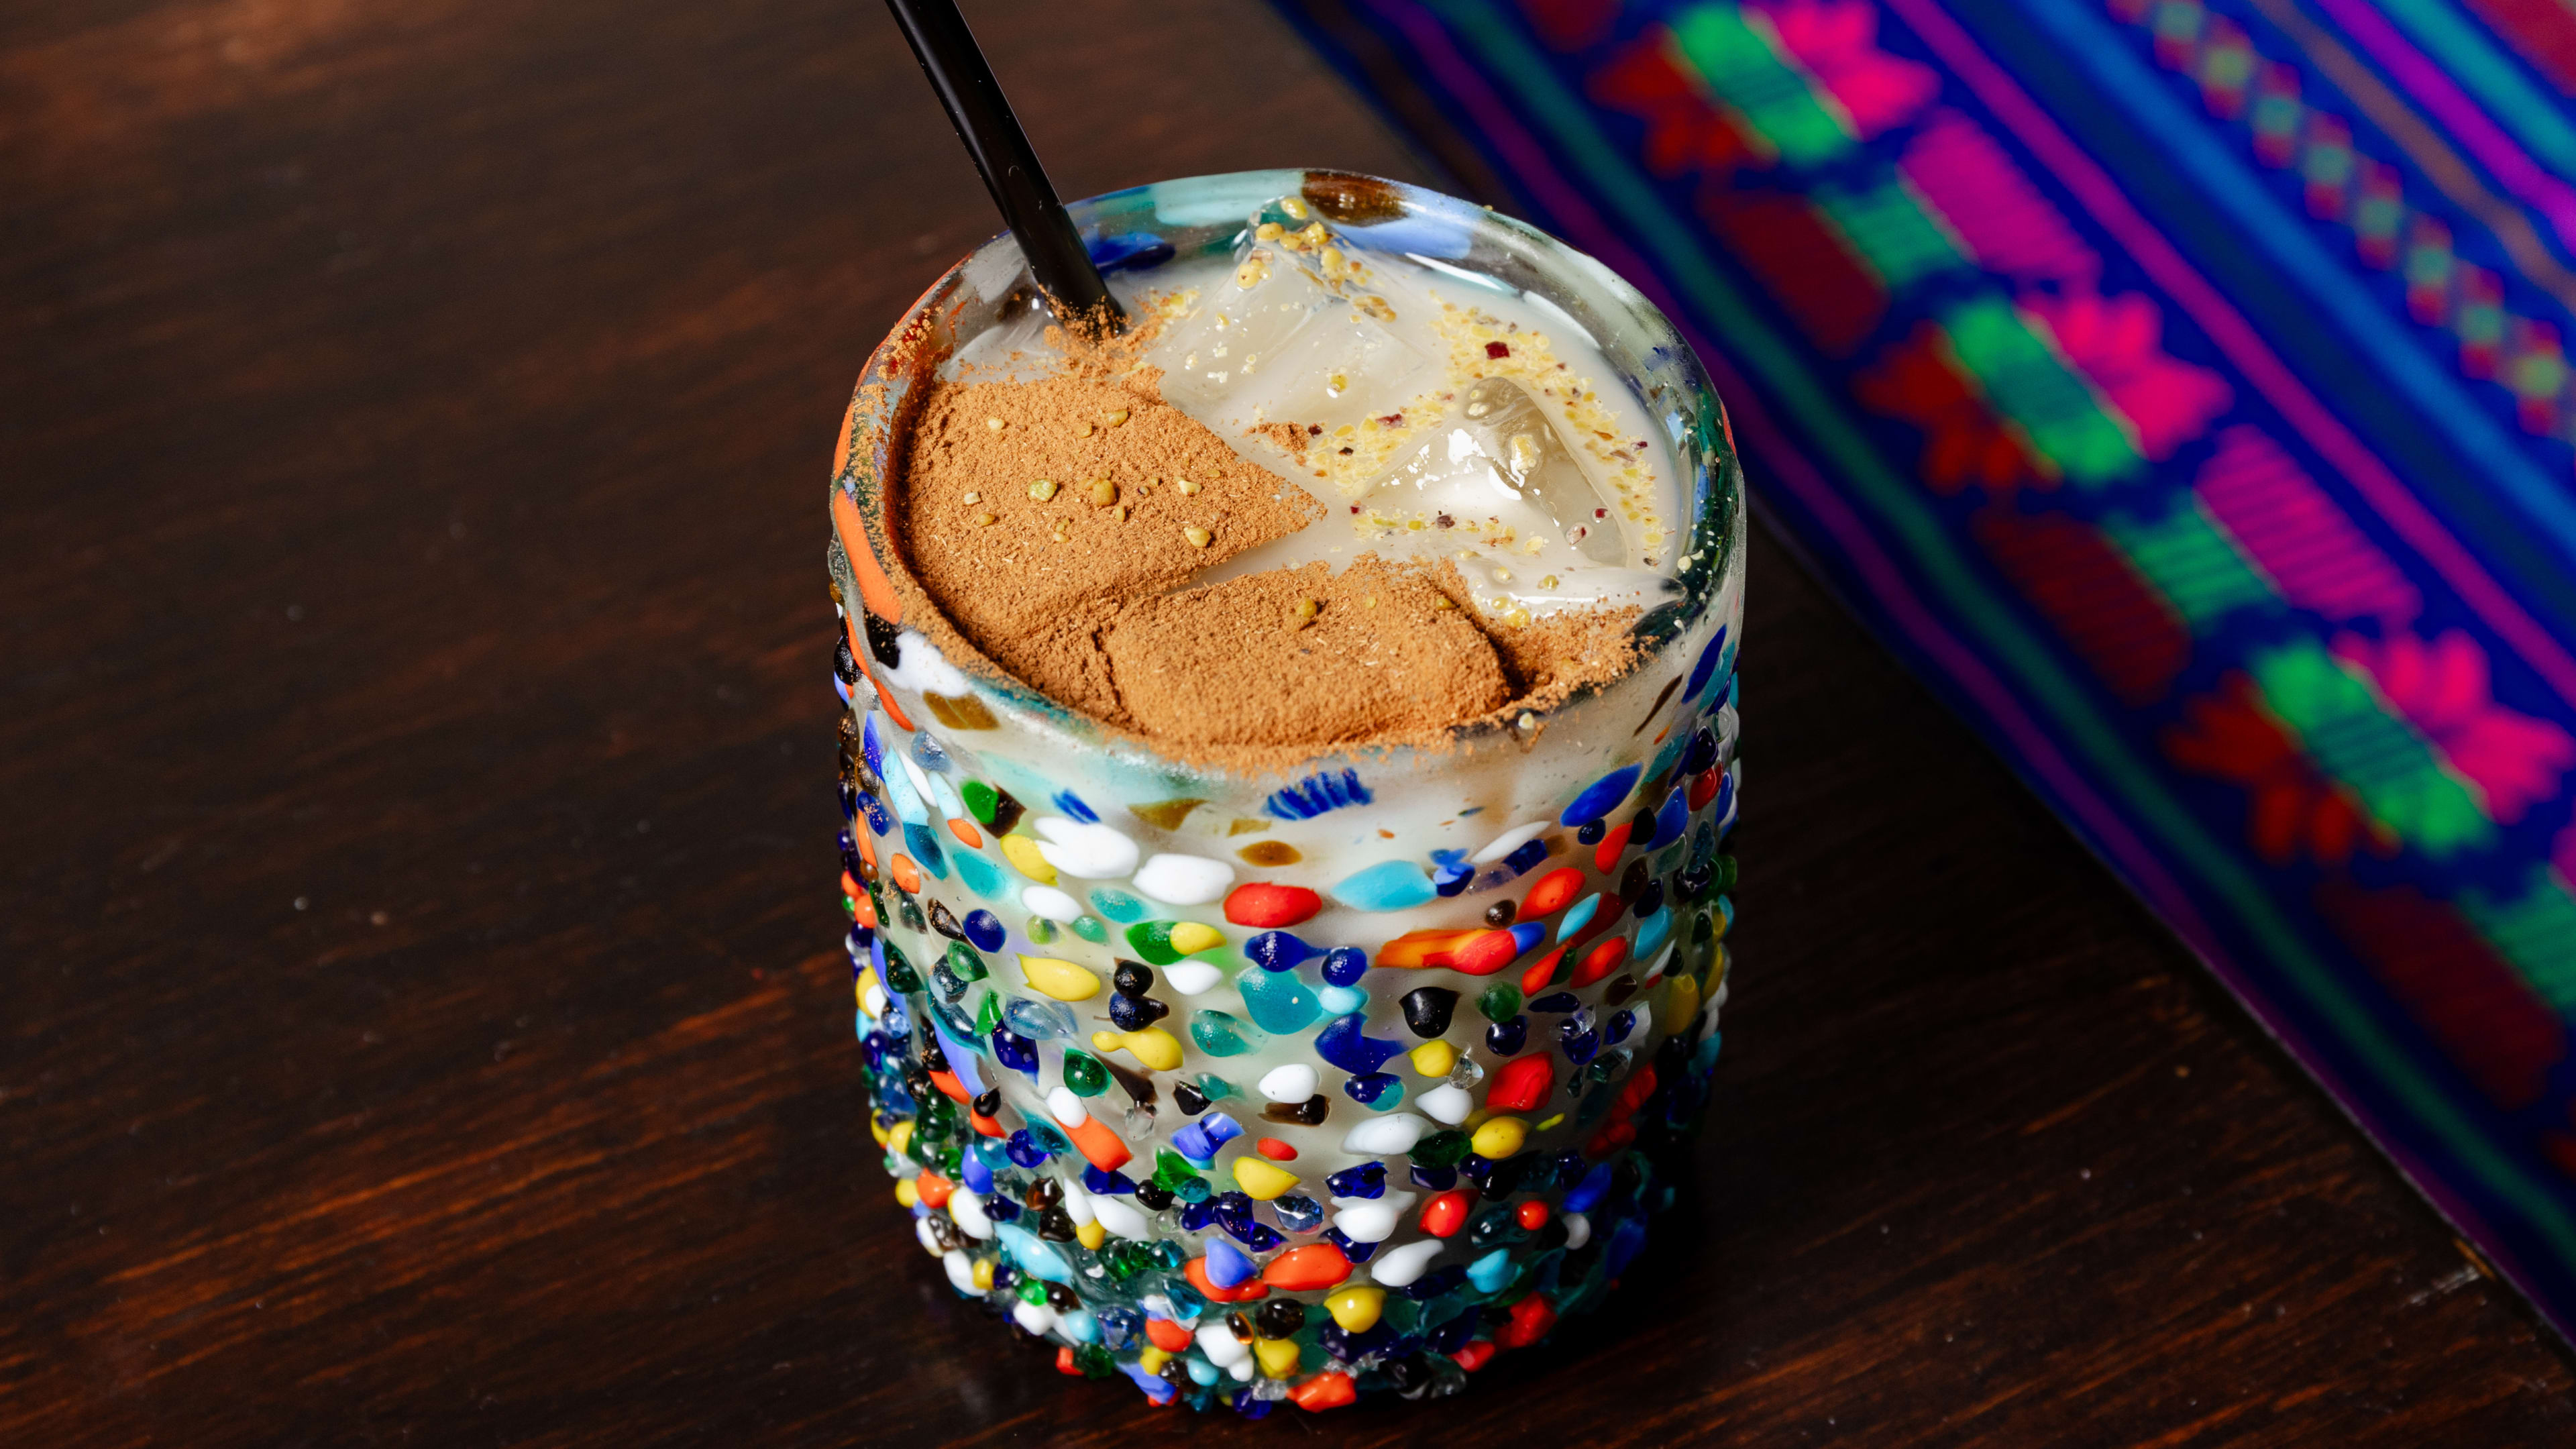 Horchata in a glass with colorful polkadots